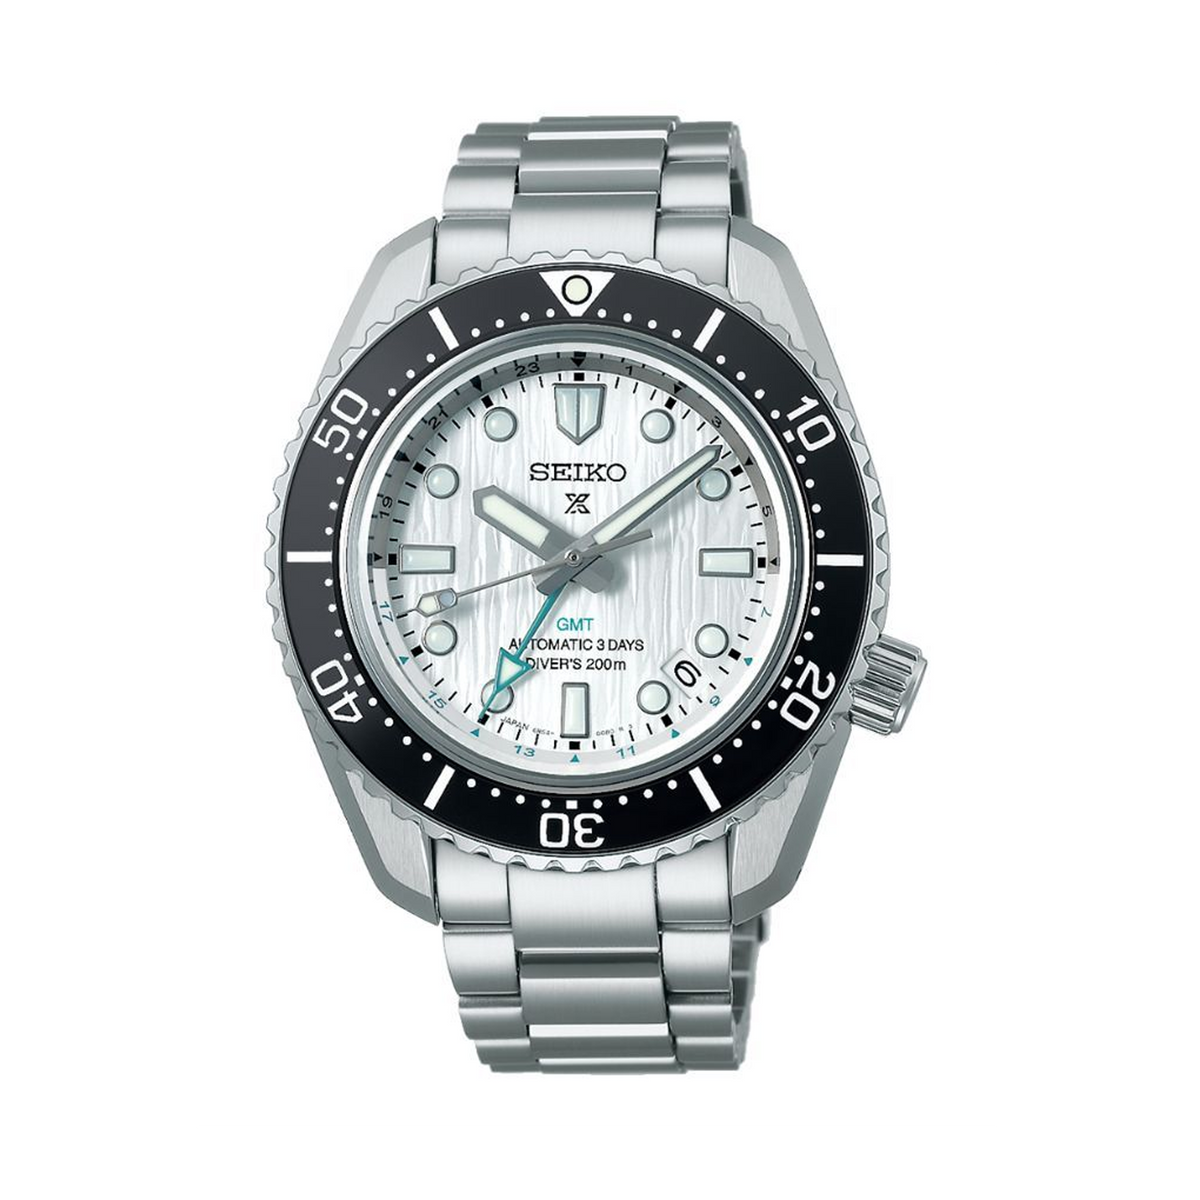 Seiko Prospex Men's 42mm Stainless Steel Automatic Watch